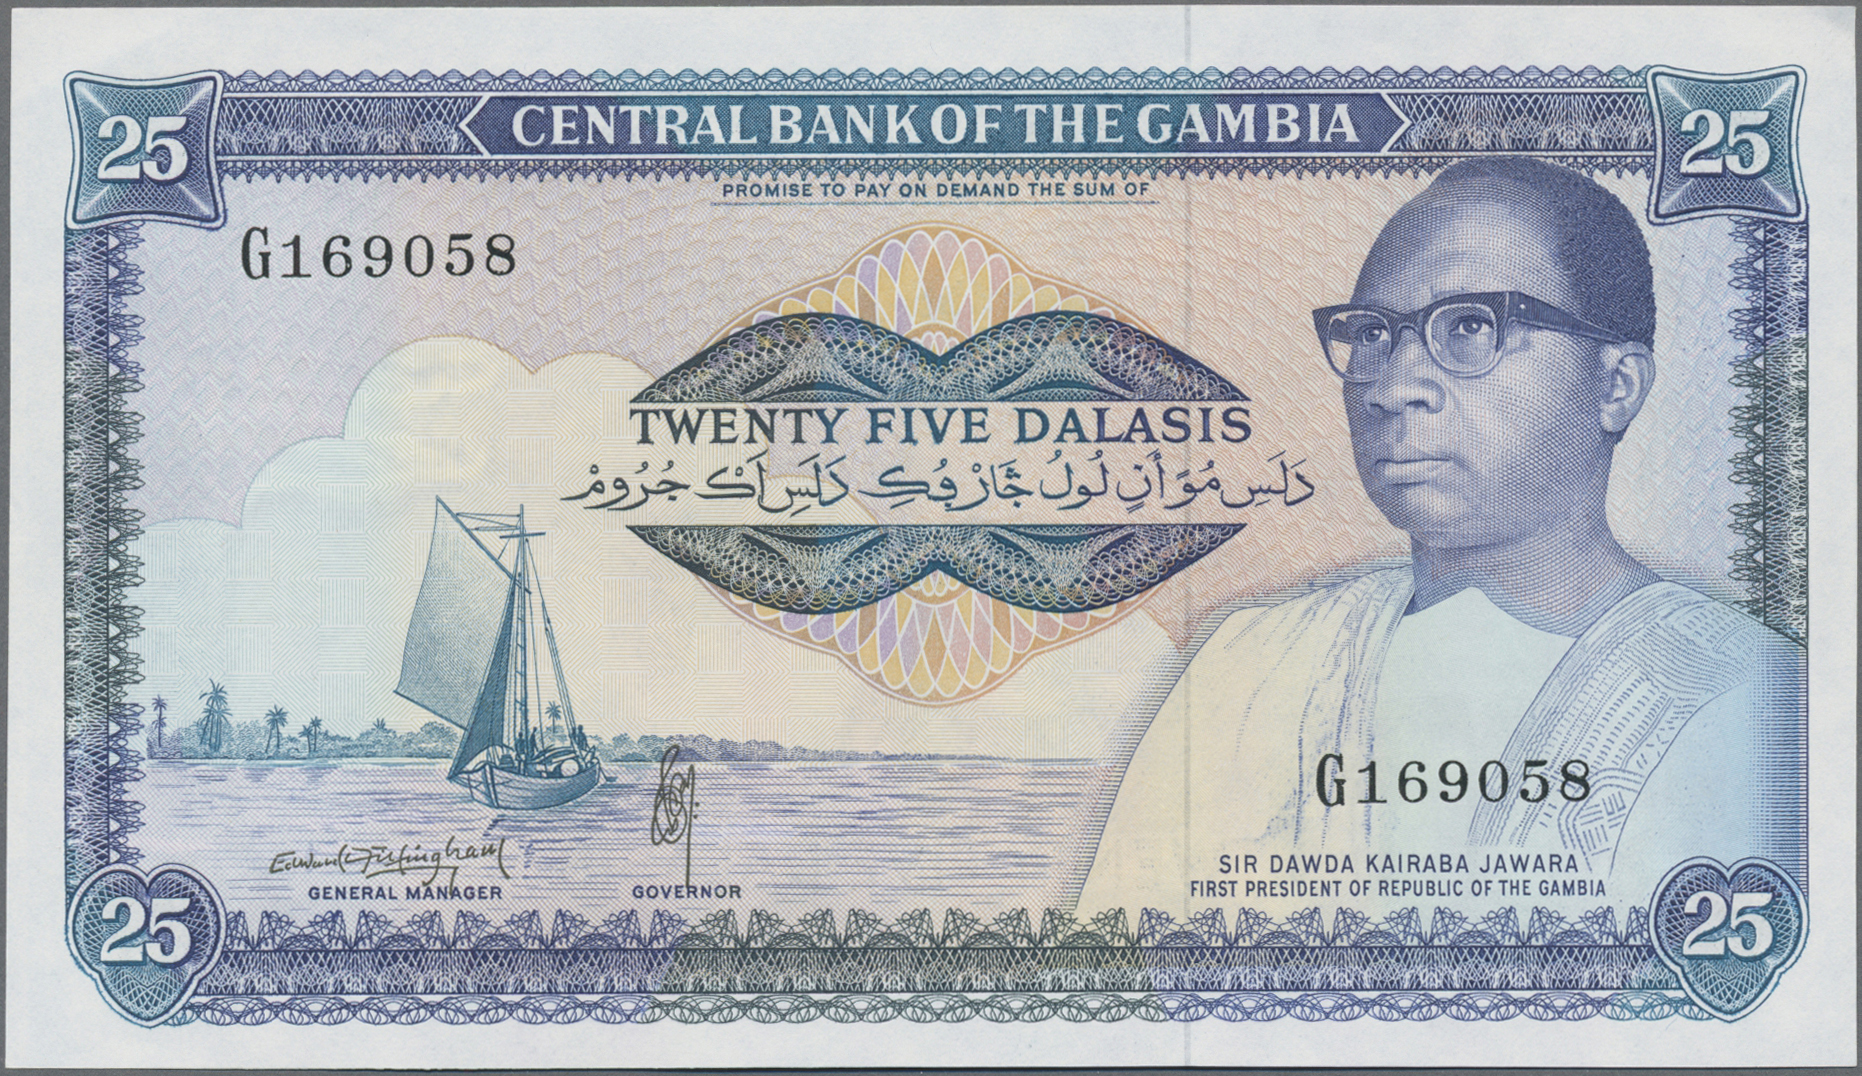 Lot 00210 - Gambia | Banknoten  -  Auktionshaus Christoph Gärtner GmbH & Co. KG 55th AUCTION - Day 1